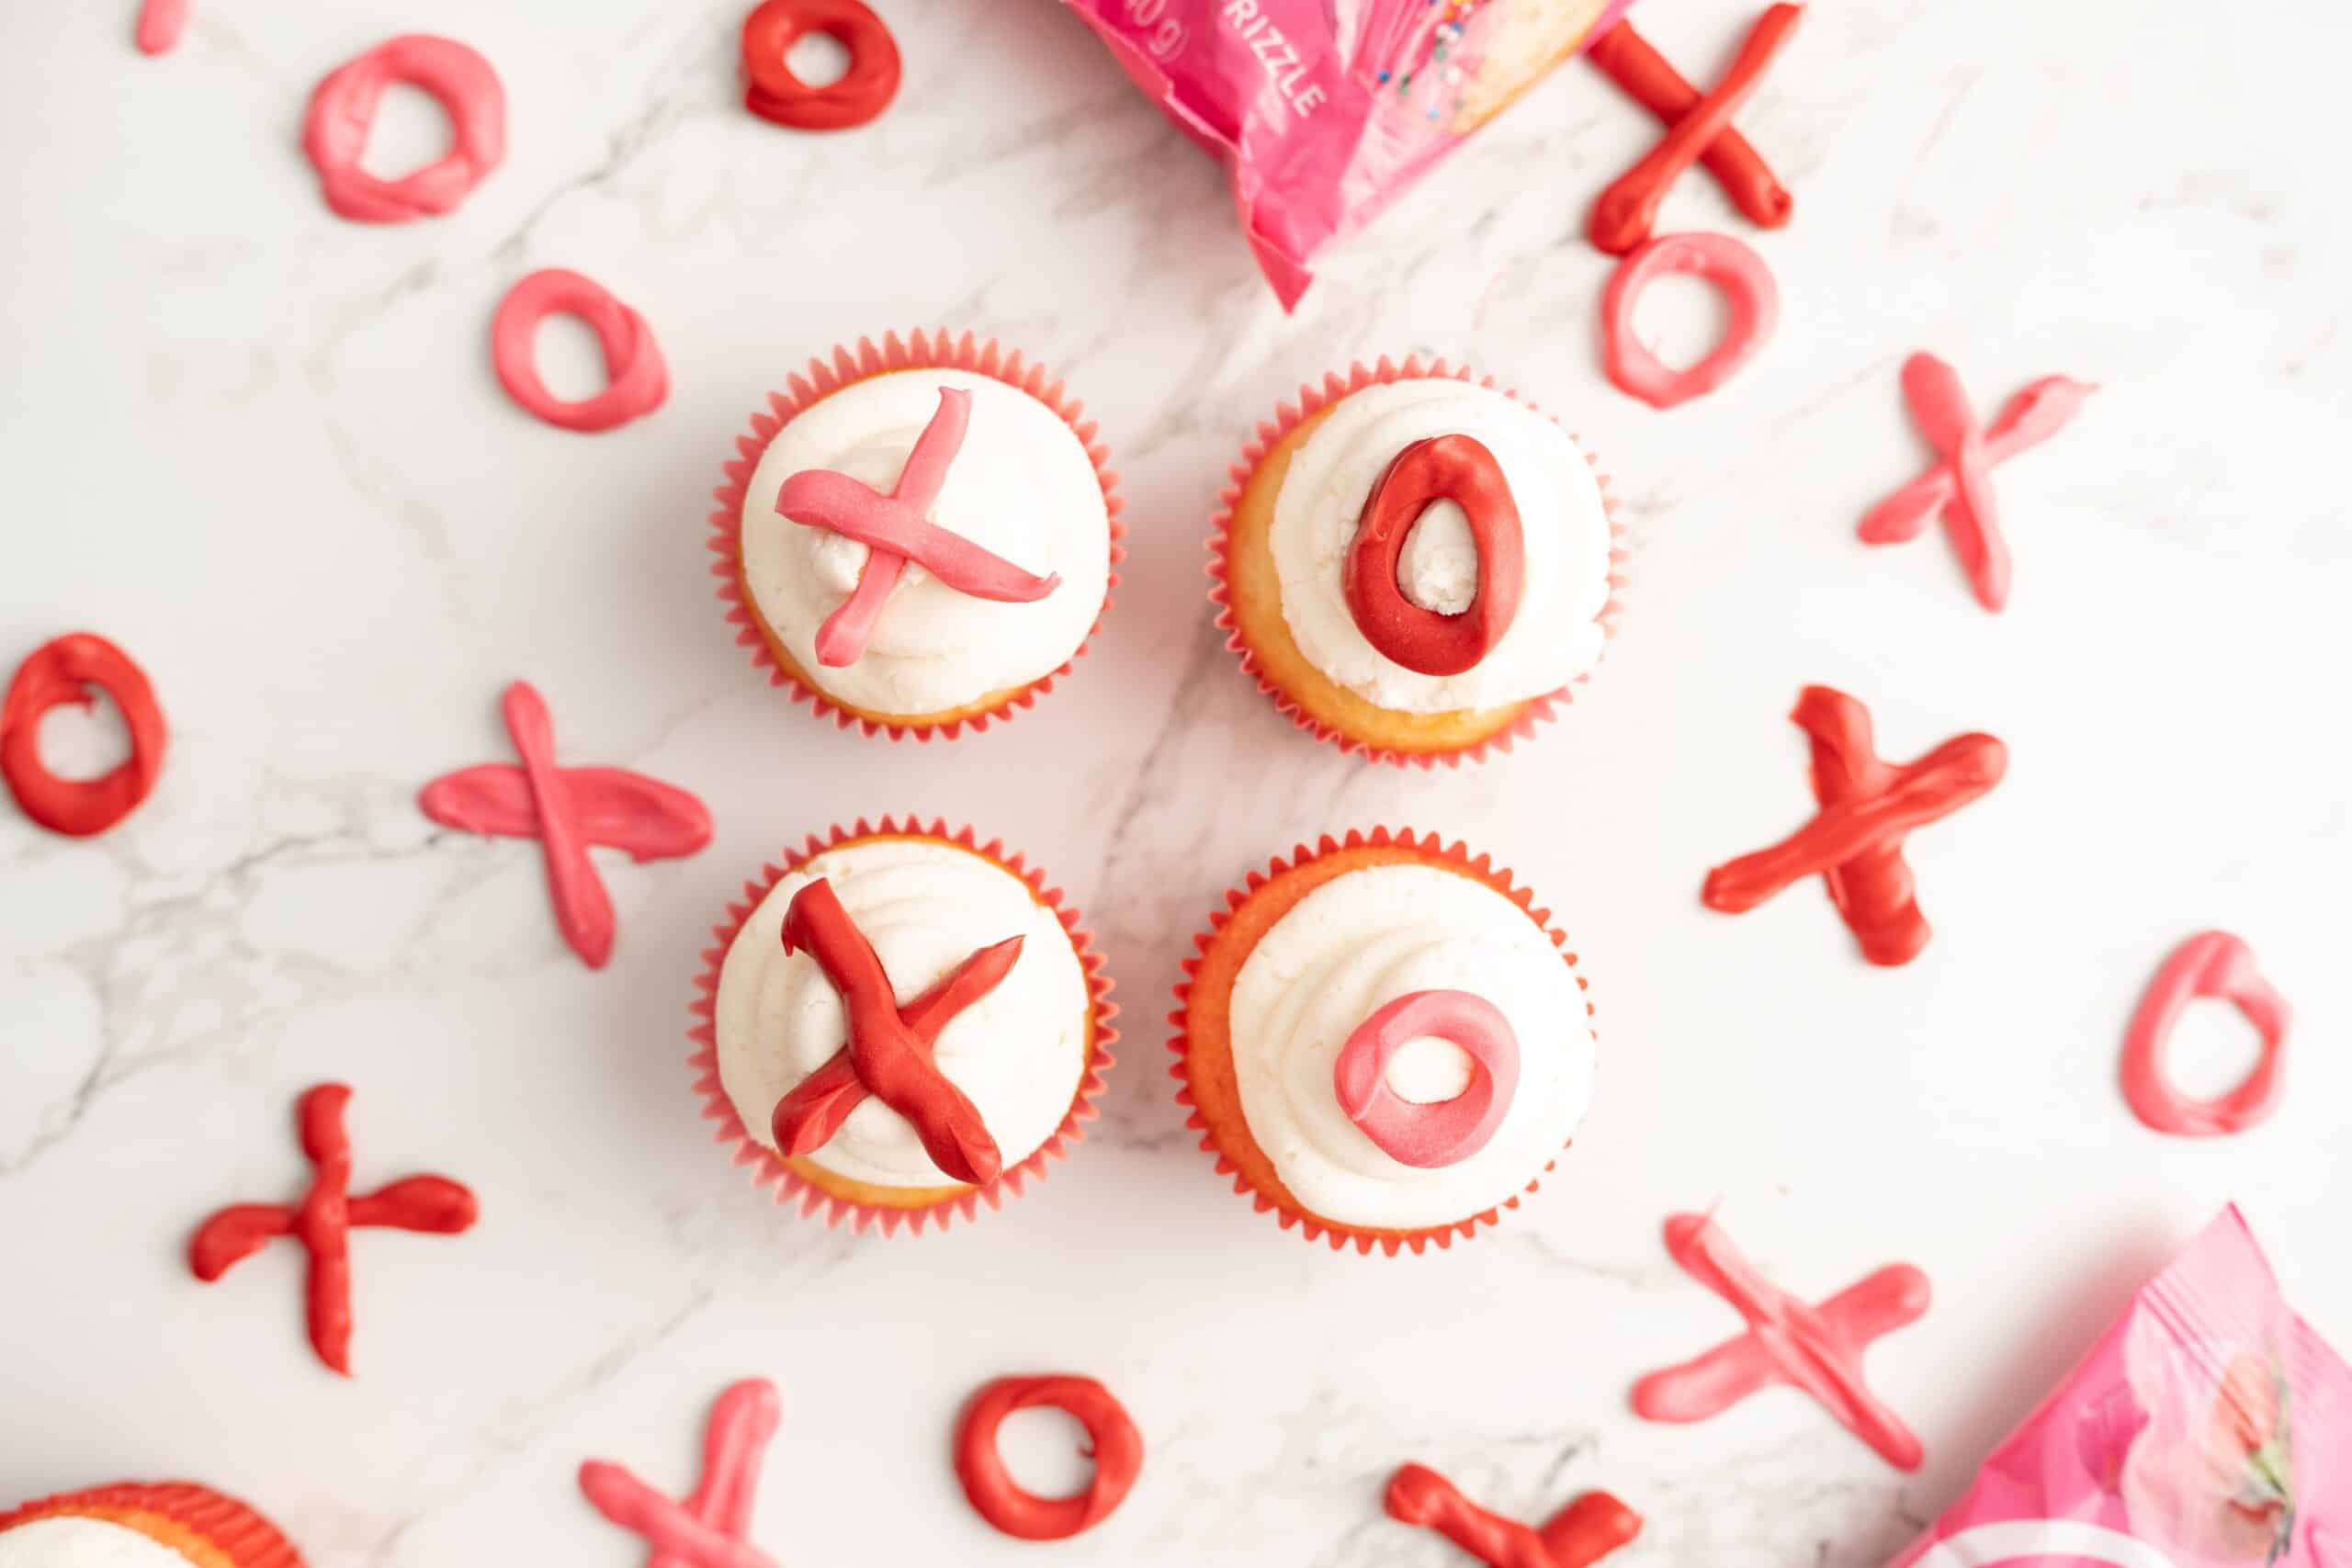 XOXO cupcakes (easy Valentine's Day cupcake toppers)